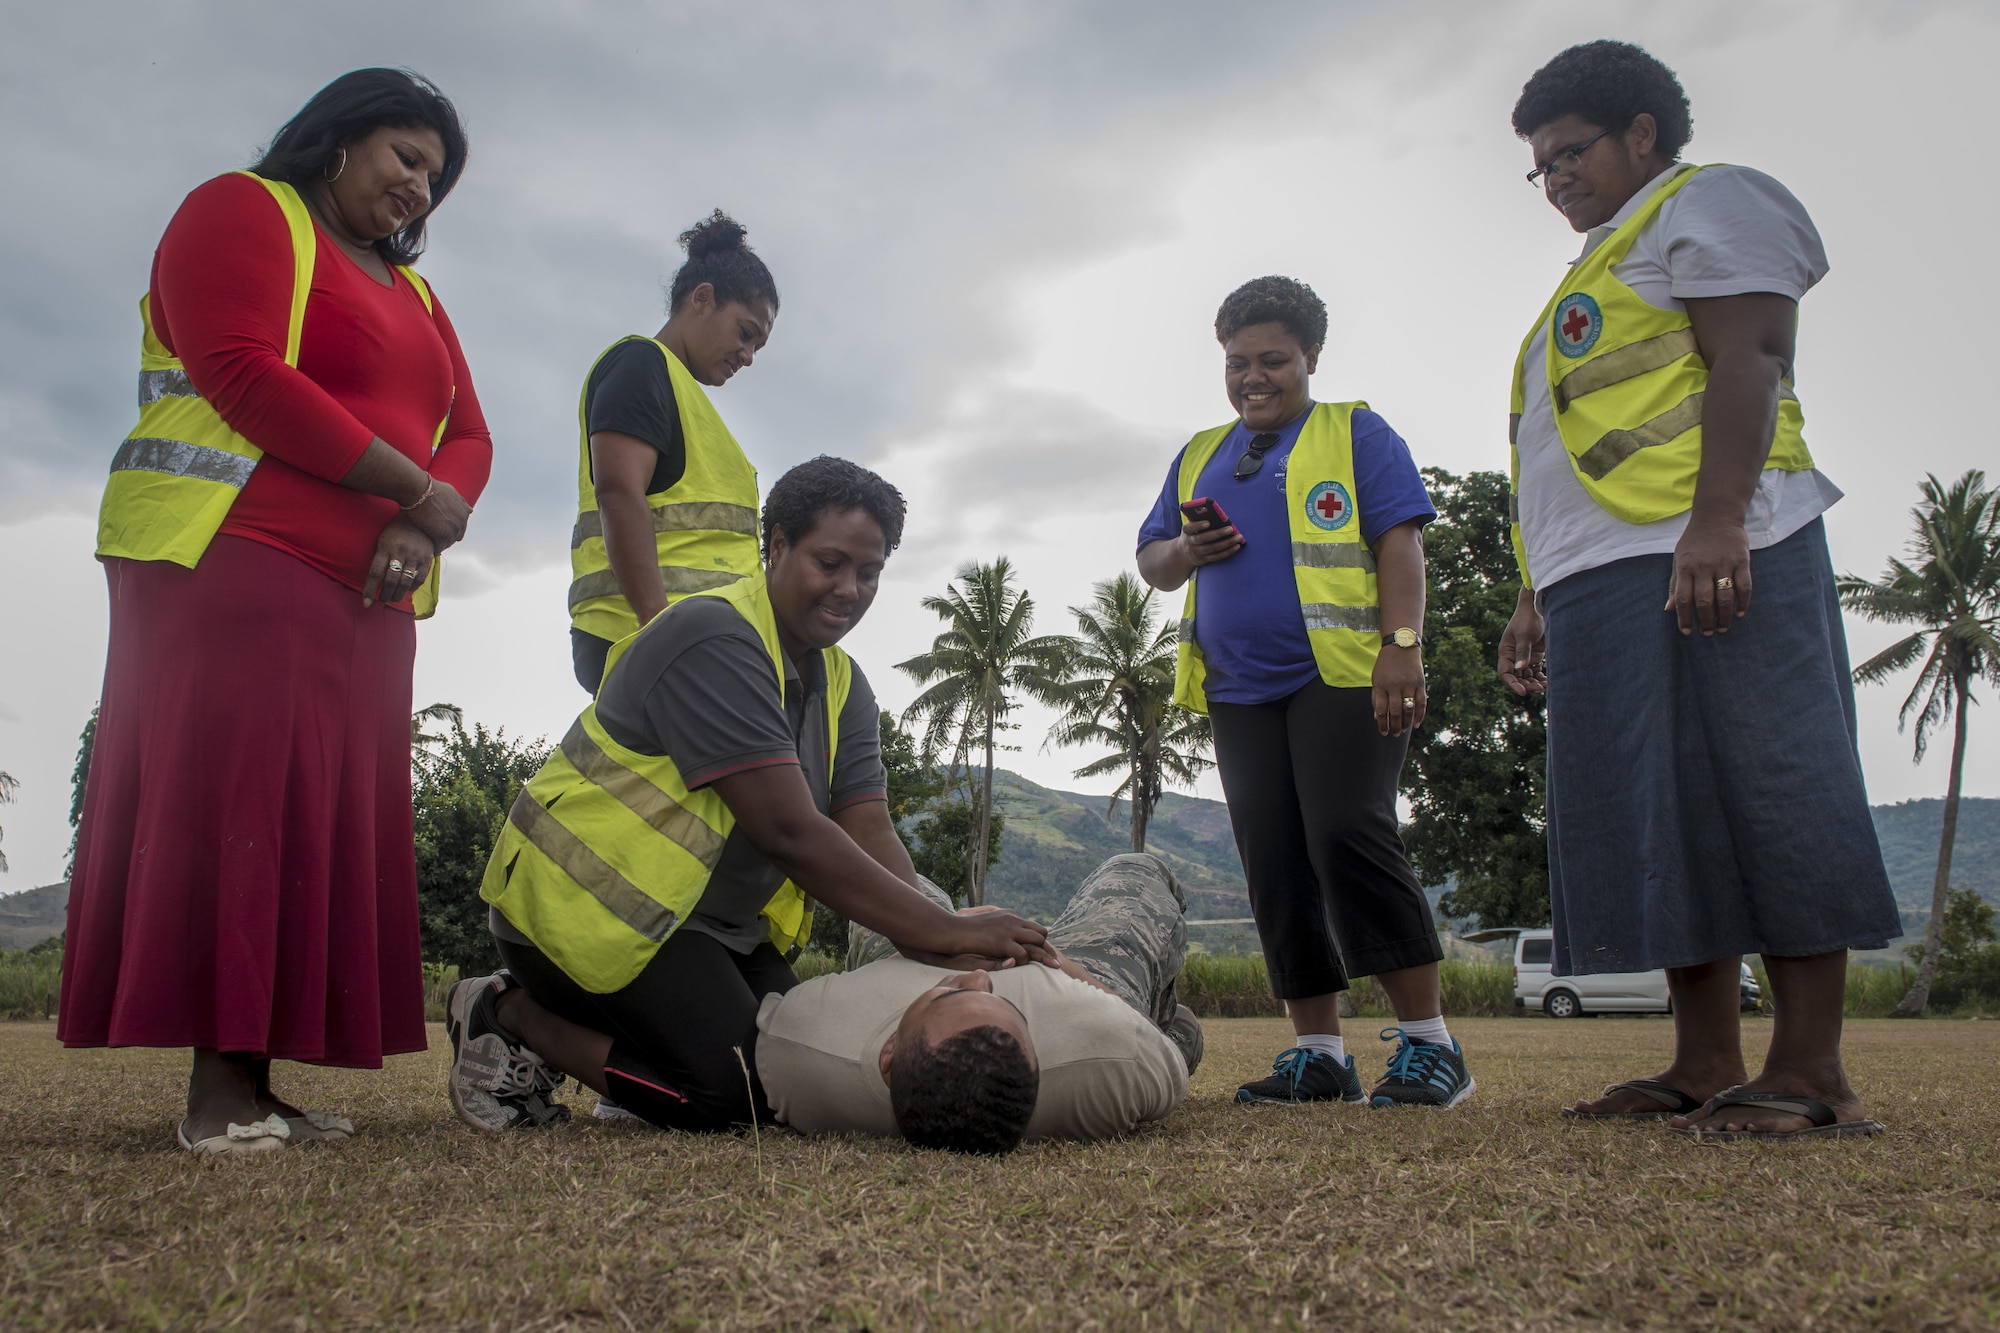 U.S. Air Force Senior Airman Chris Rodgers, an aerospace medical service journeyman with the 35th Medical Operations Squadron at Misawa Air Base, Japan, teaches Fijian health care volunteers the basics of CPR during a hands-on training as part of Pacific Angel 17-3 at Tagitagi Sangam School and Kindergarten in Tavua, Fiji, July 15, 2017. Rodgers and seven other Misawa Airmen joined more than 50 U.S. service members in support of this exercise. The exercise strengthens interoperability and partnership between the United States, Fiji and other nations and organizations in the Indo-Asia-Pacific region. (U.S. Air Force photo by Tech. Sgt. Benjamin W. Stratton)